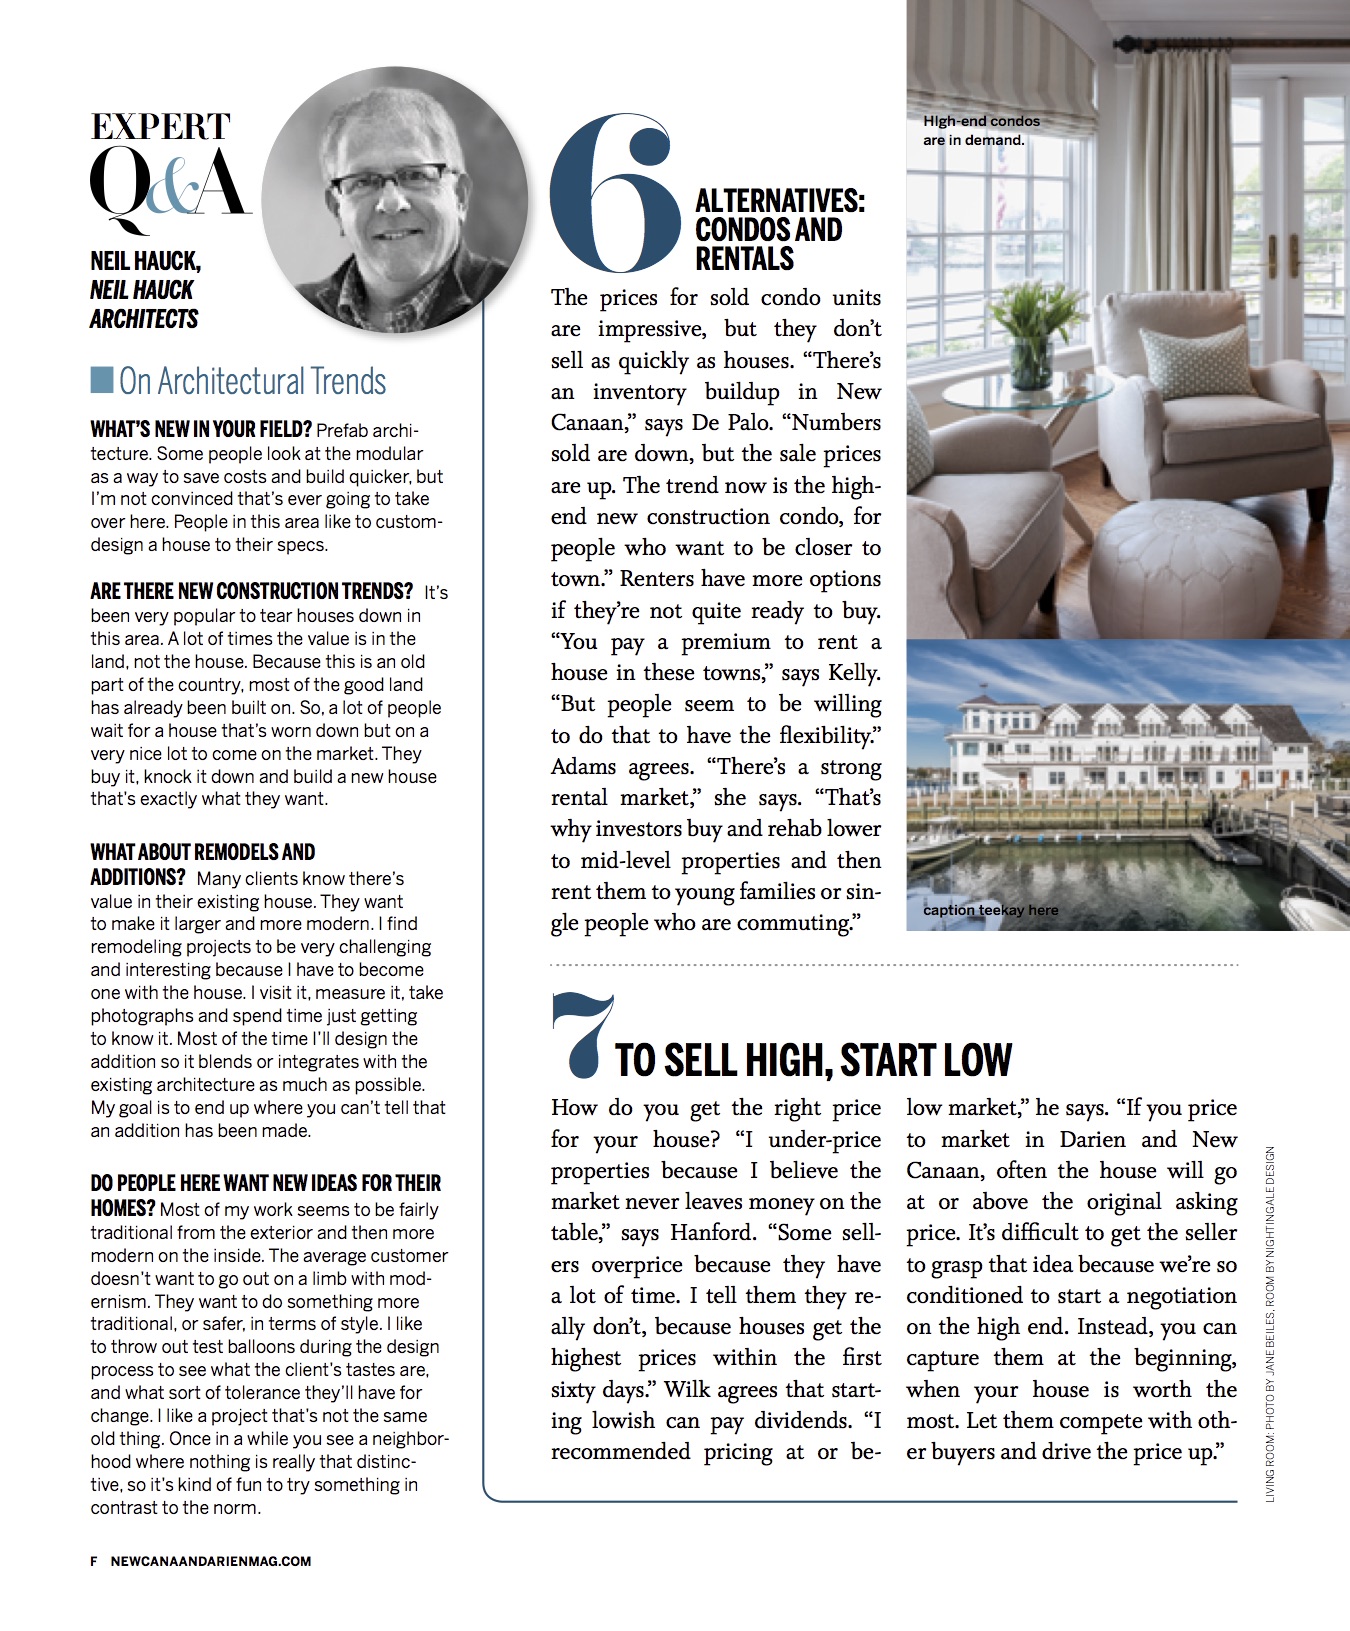 New Canaan magazine real estate story F.jpg